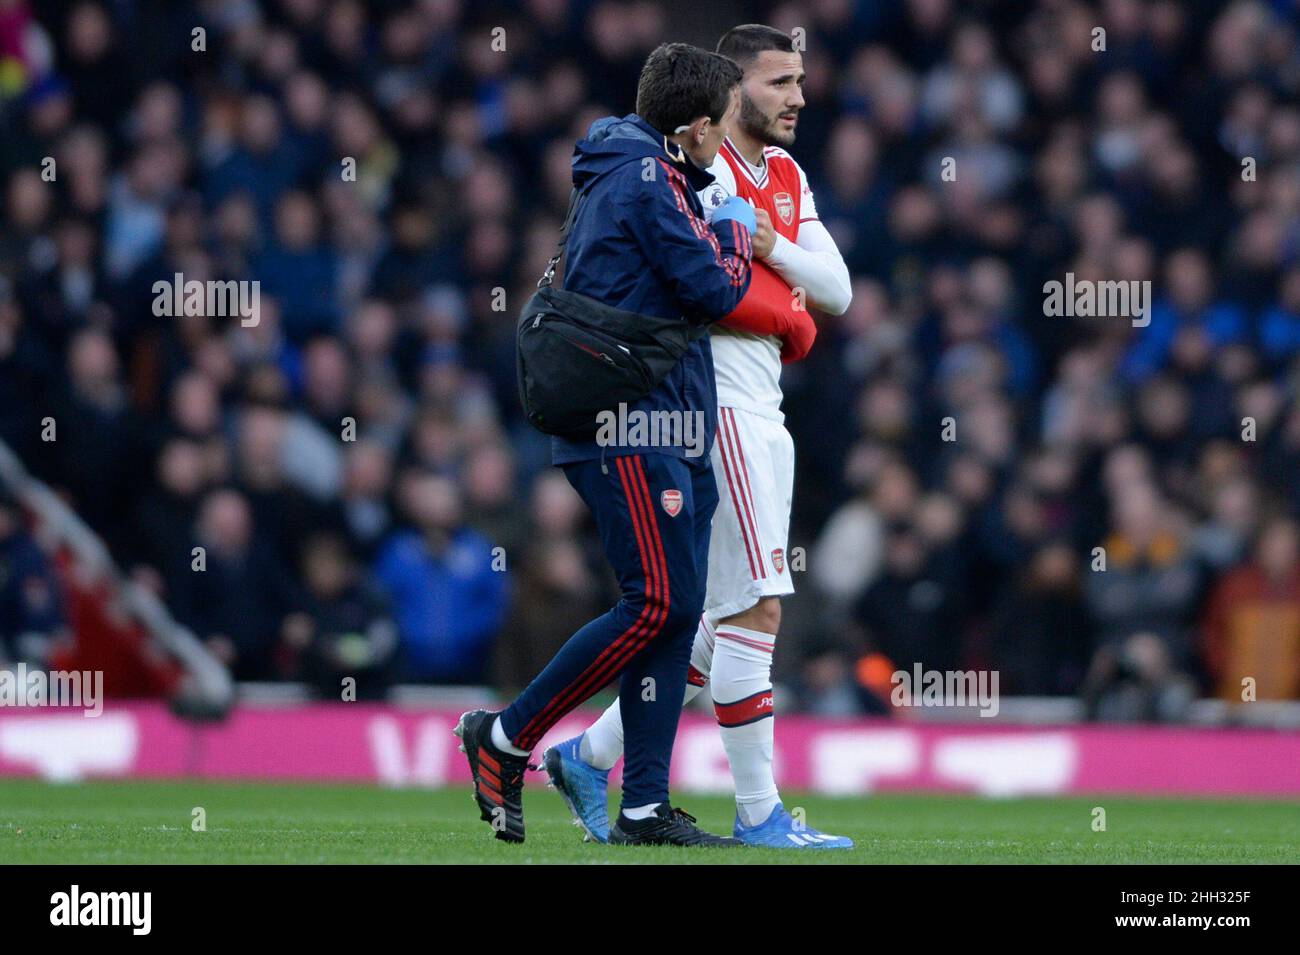 Sead Kolasinac of Arsenal leaves the pitch after suffering an injury during the Premier League match between Arsenal and Everton at the Emirates Stadium in London, UK - 16th February 2020 Stock Photo